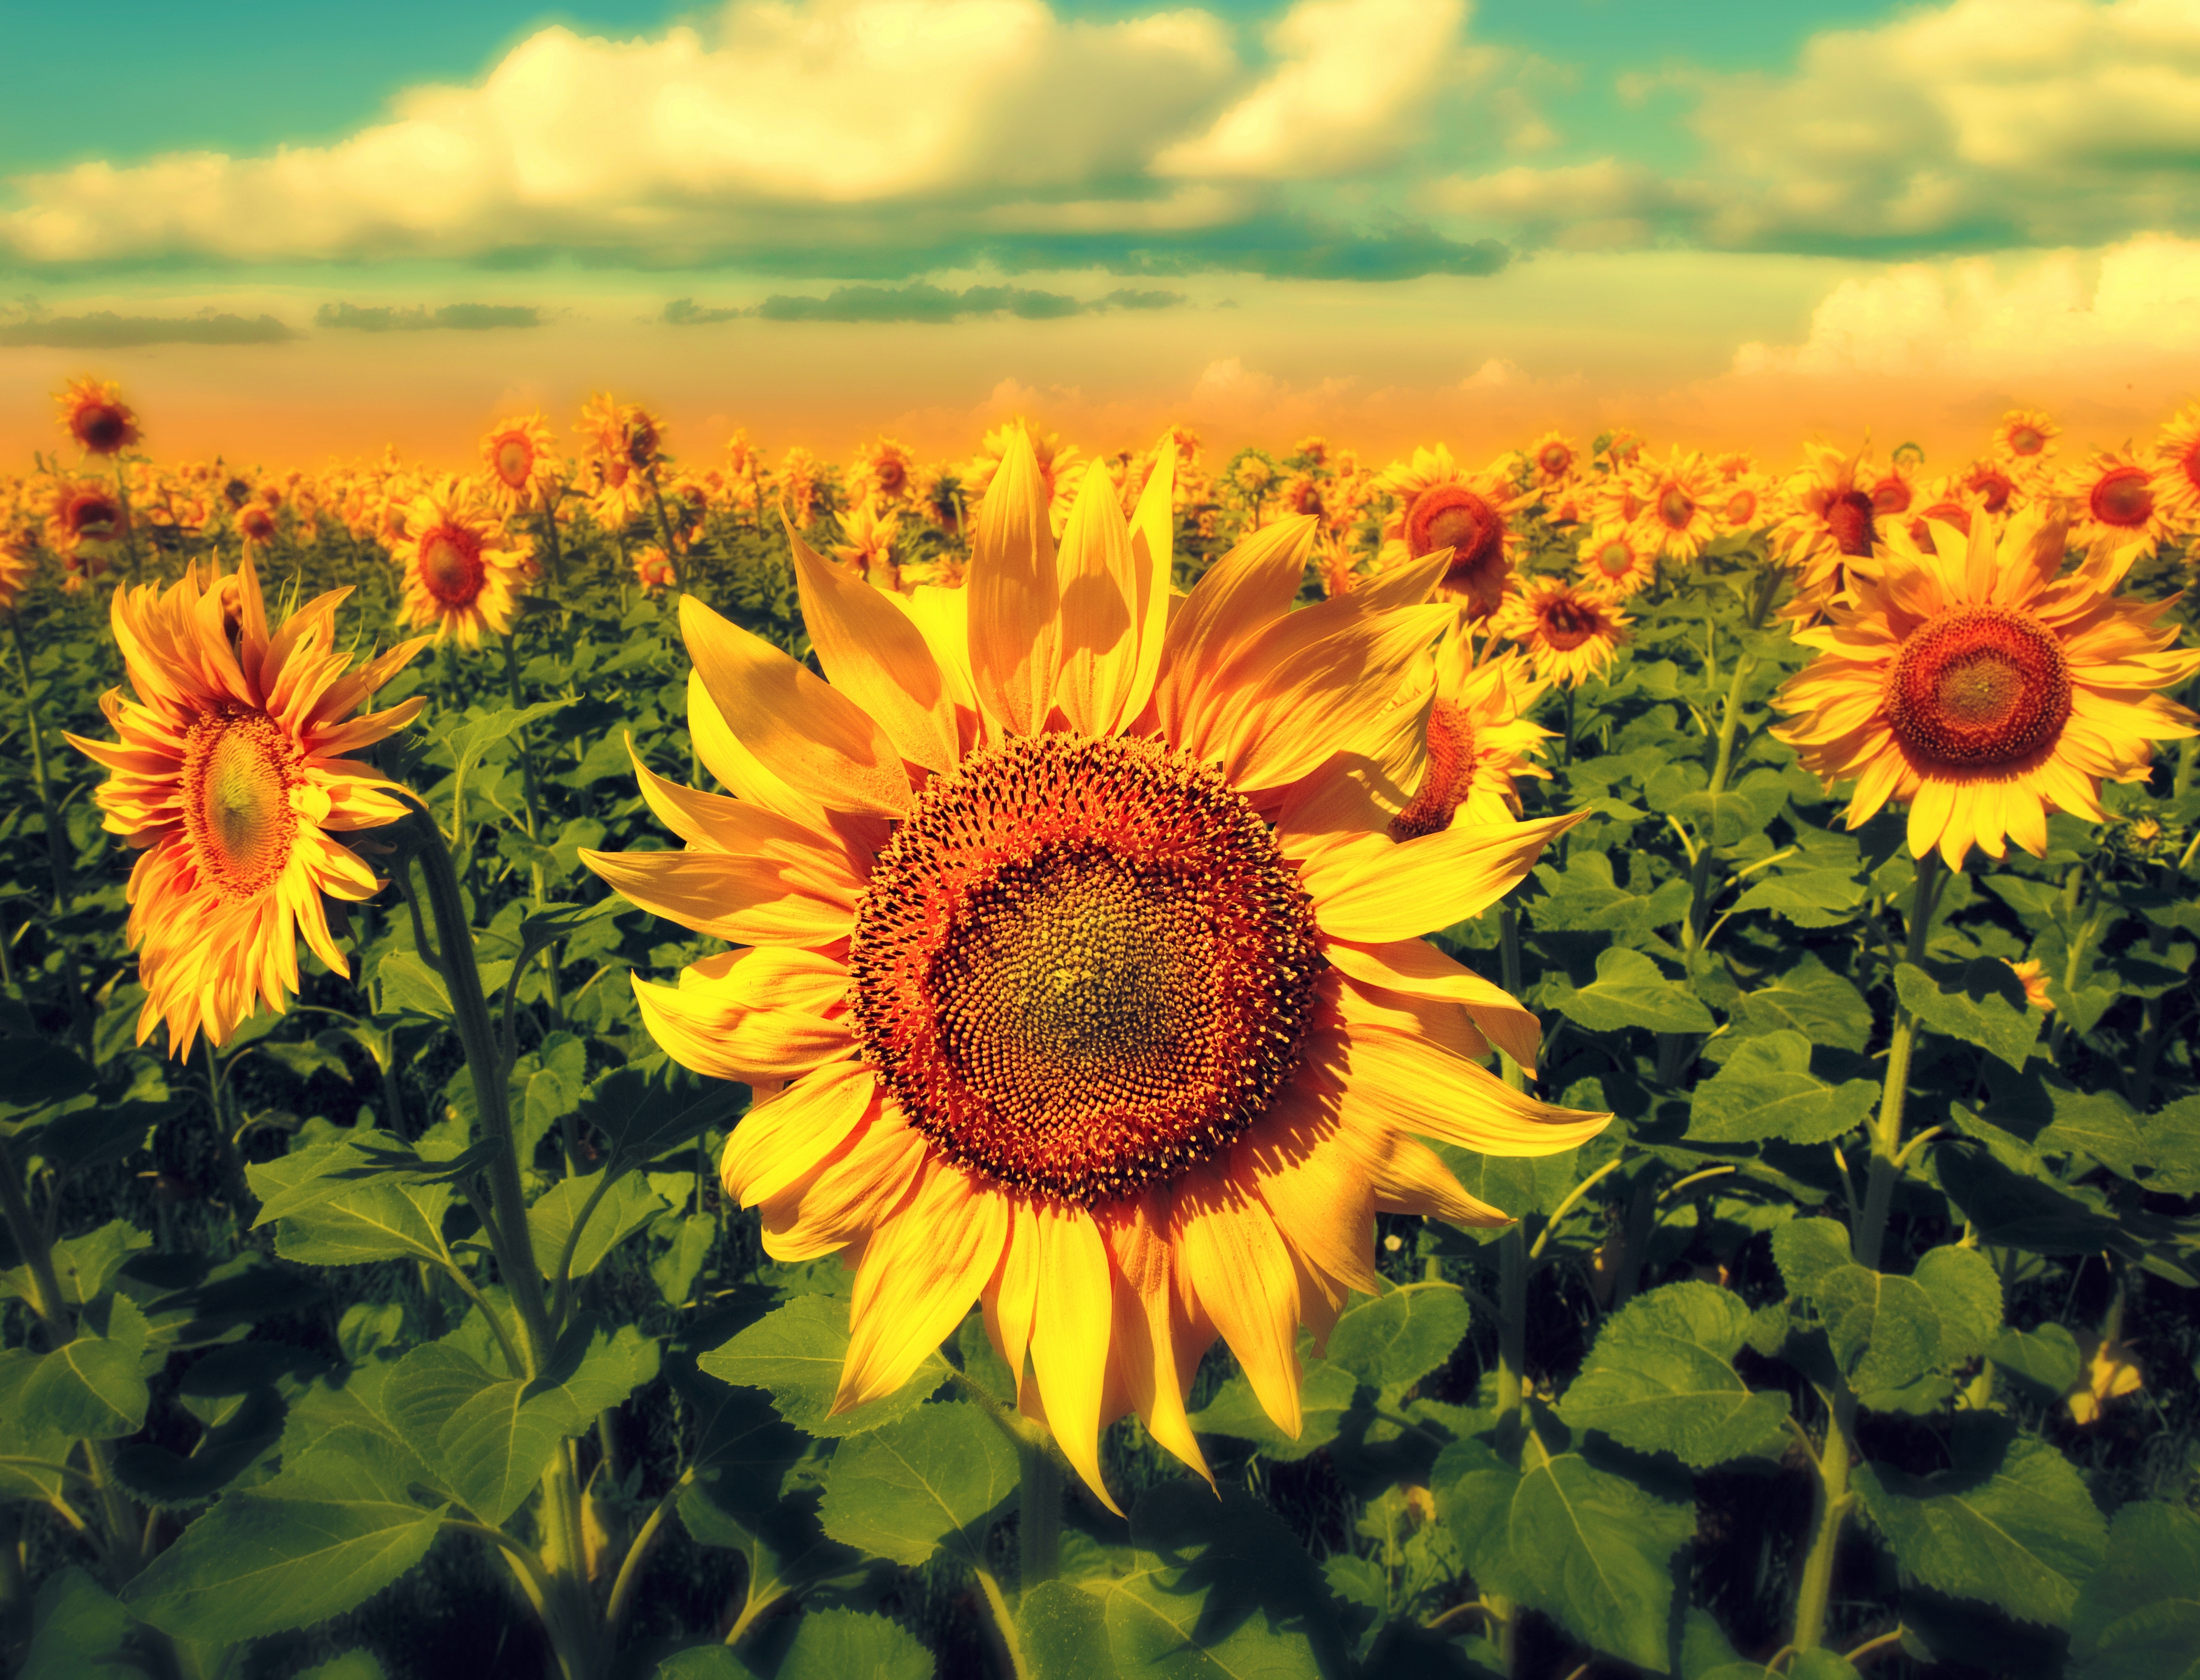 Sunflower 4k Ultra HD Wallpaper and Background Image | 5000x3819 | ID